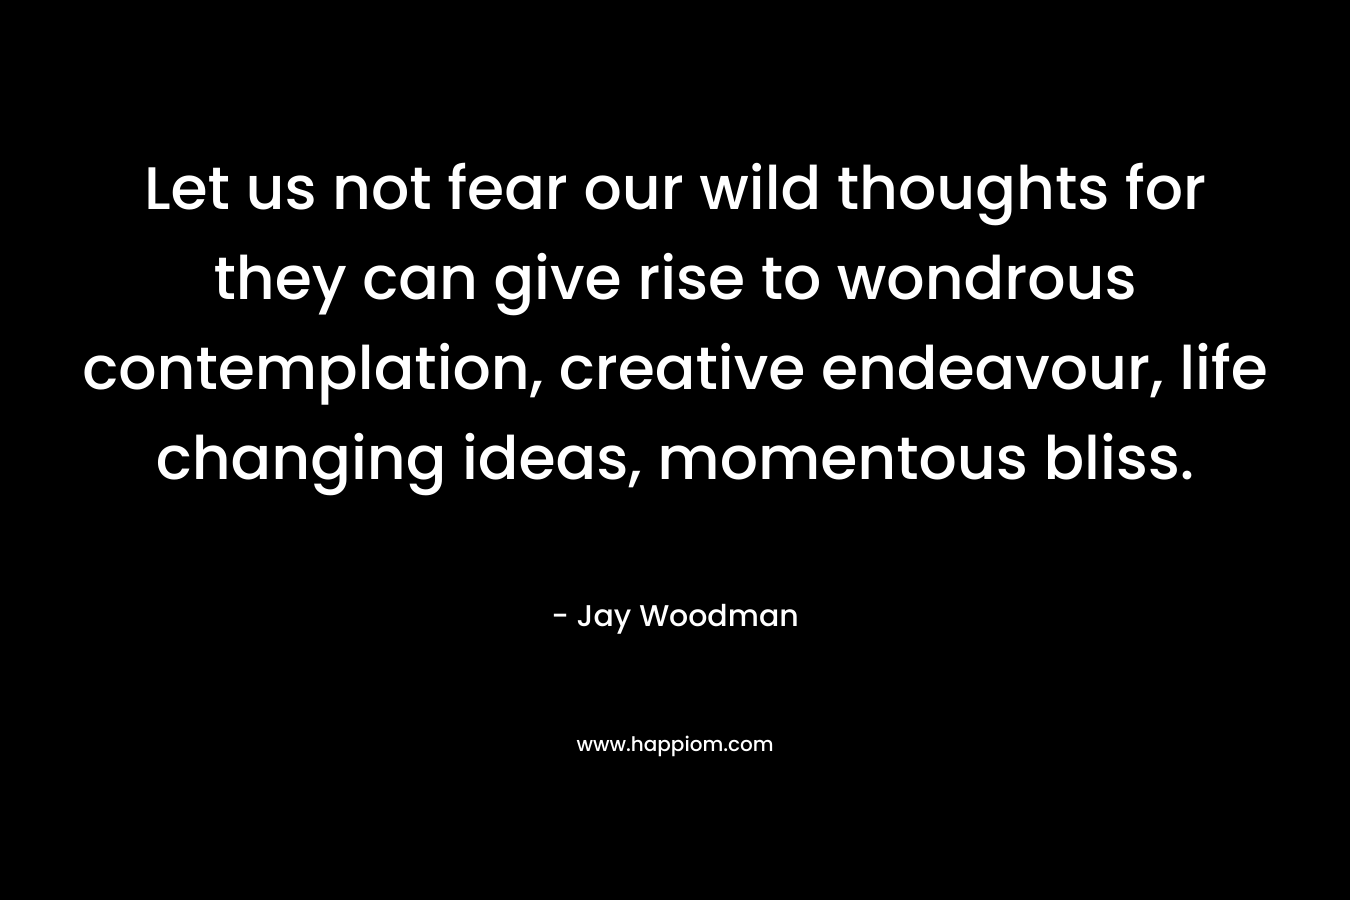 Let us not fear our wild thoughts for they can give rise to wondrous contemplation, creative endeavour, life changing ideas, momentous bliss. – Jay Woodman